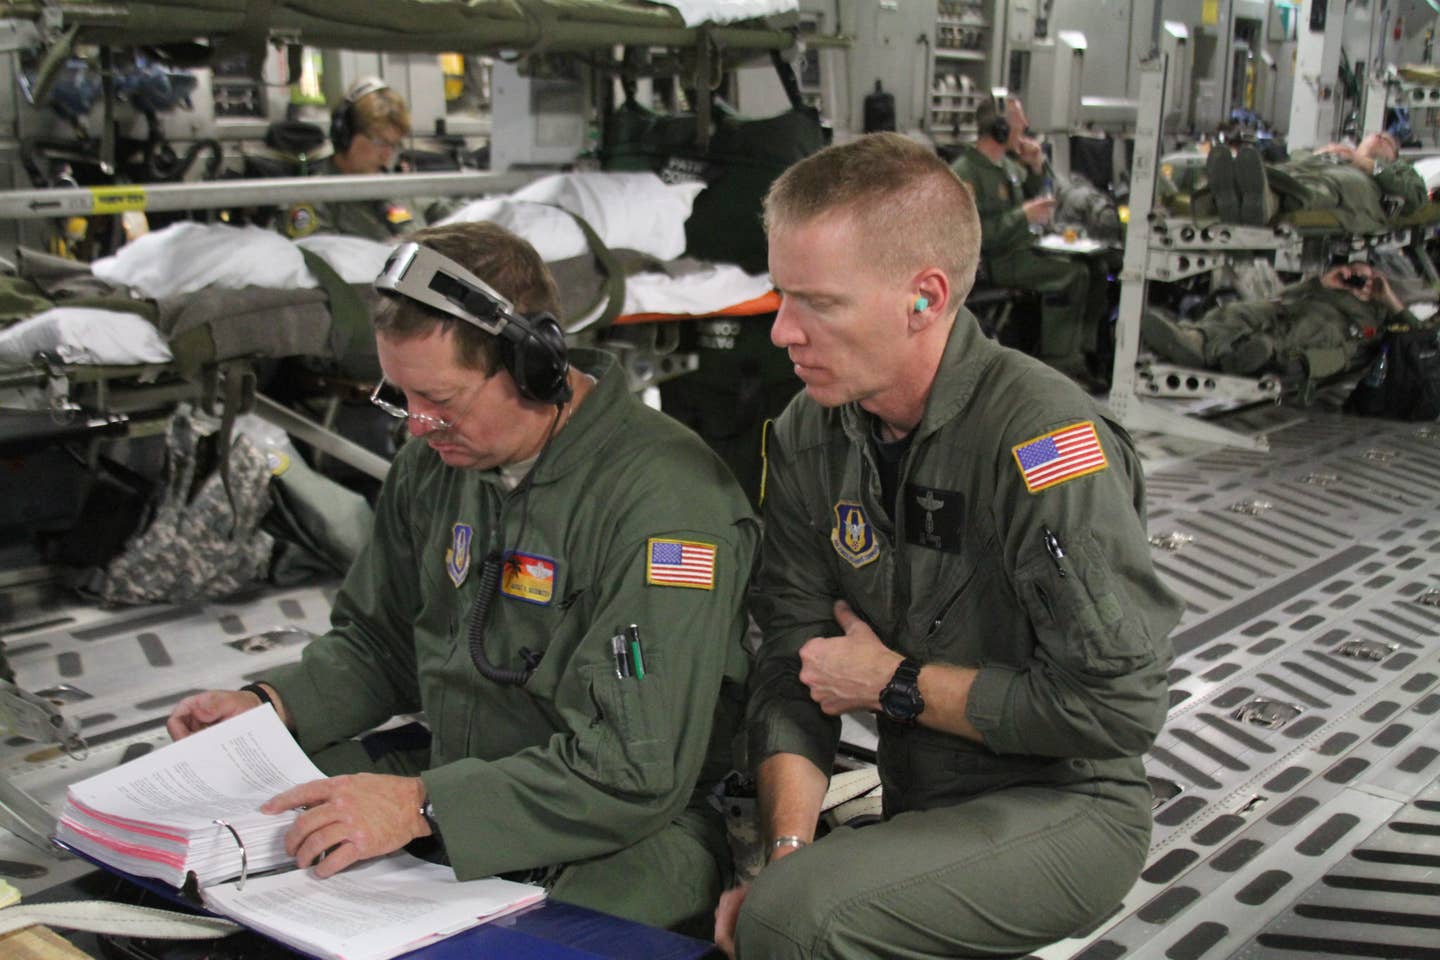 Master Sgt. Russel Goodwater and Master Sgt. Timothy Starkey assess their checklist for proper protocol during a AE training mission. (photo by Master Sgt. Christian Amezcua)